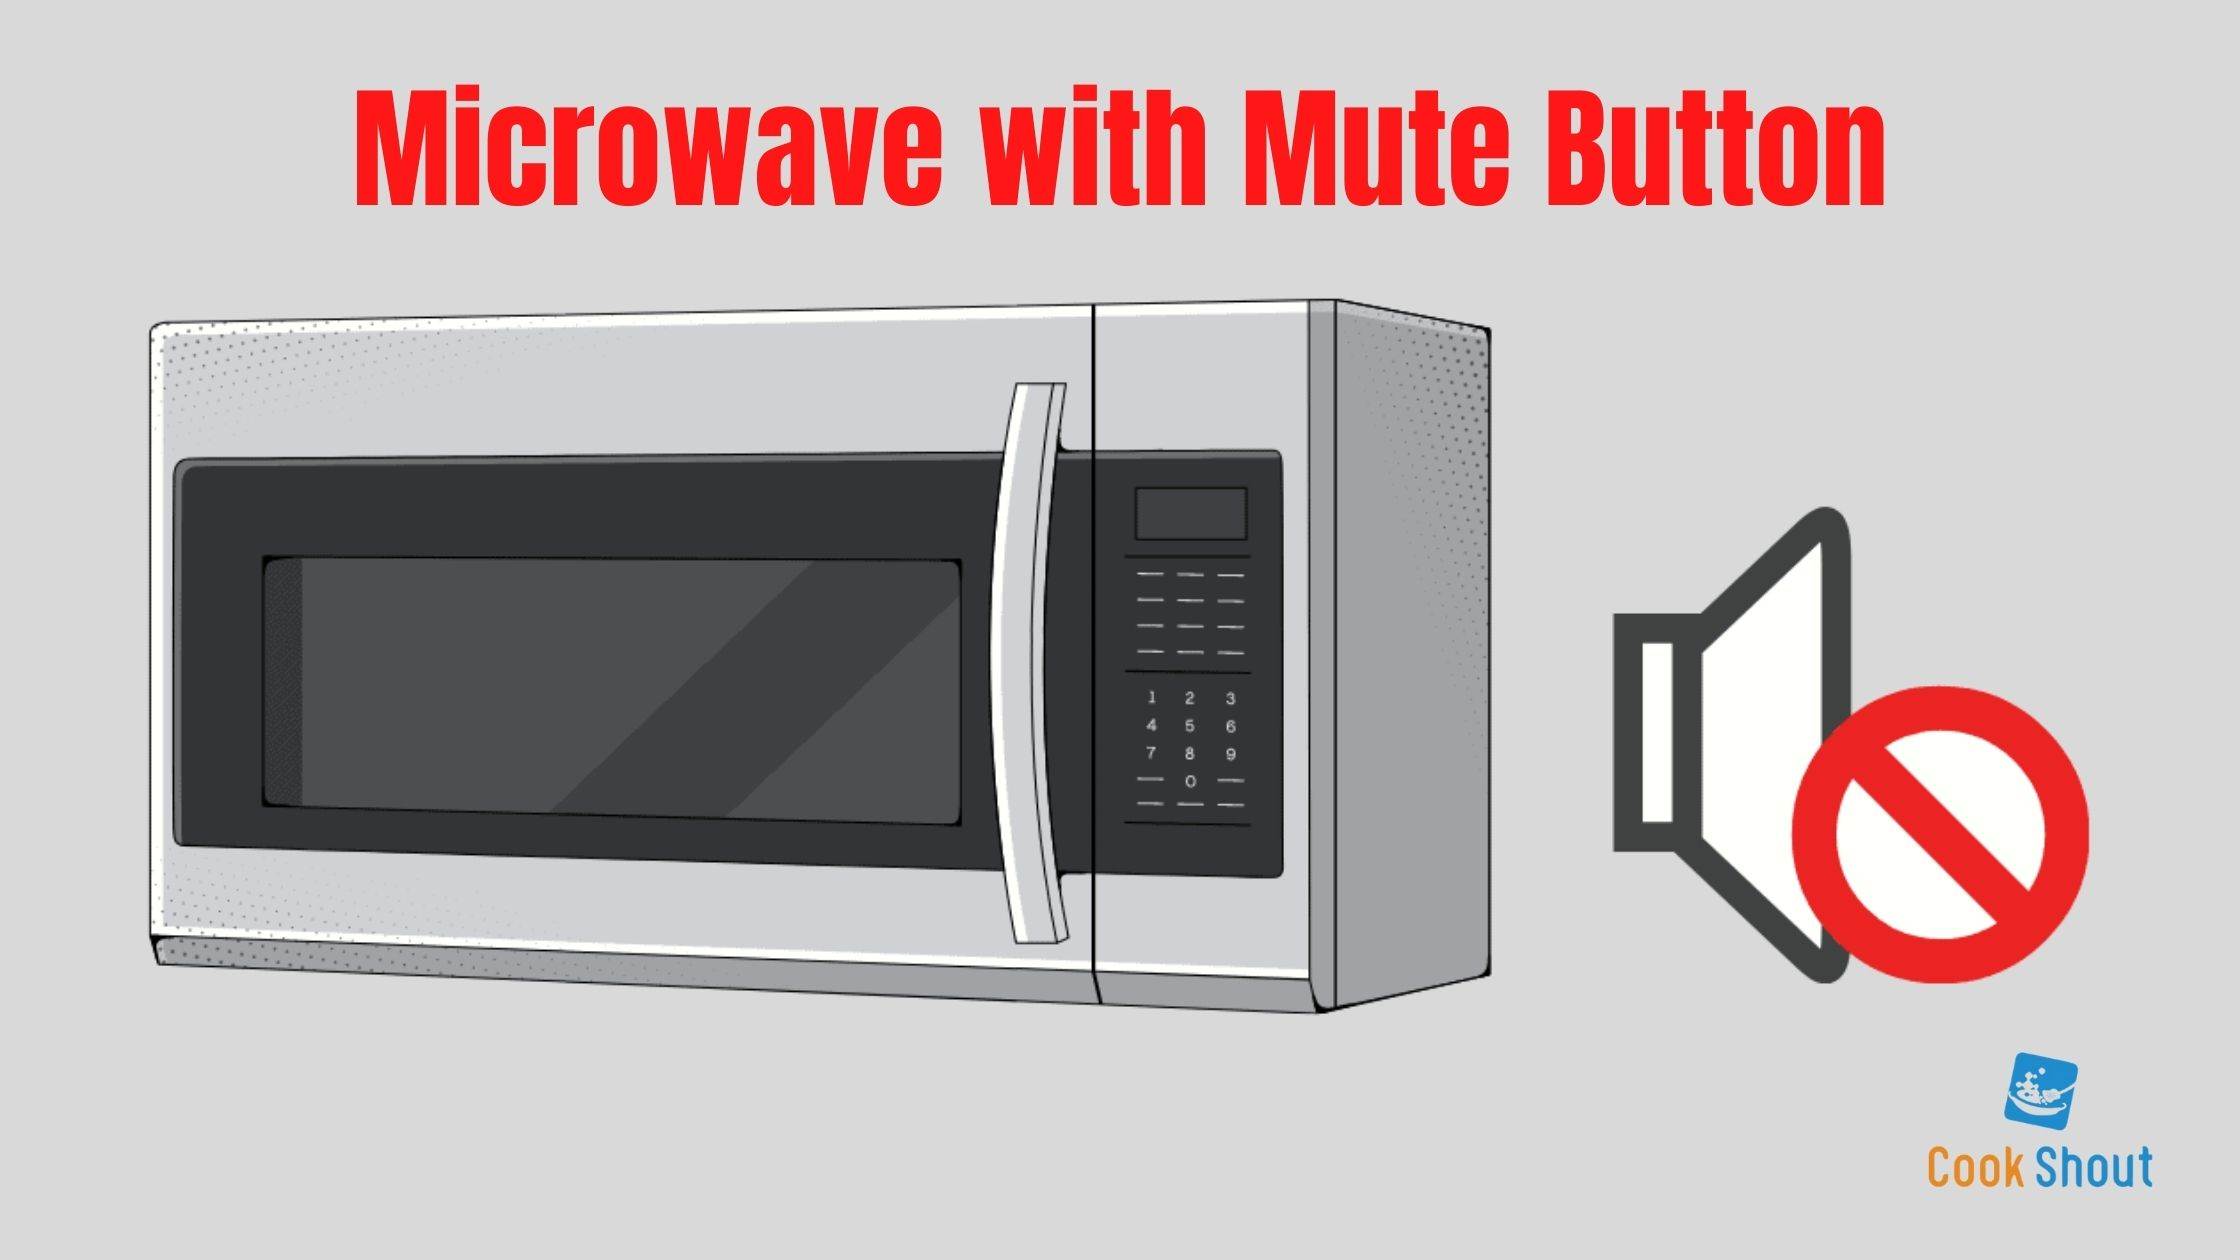 Microwave with Mute Button